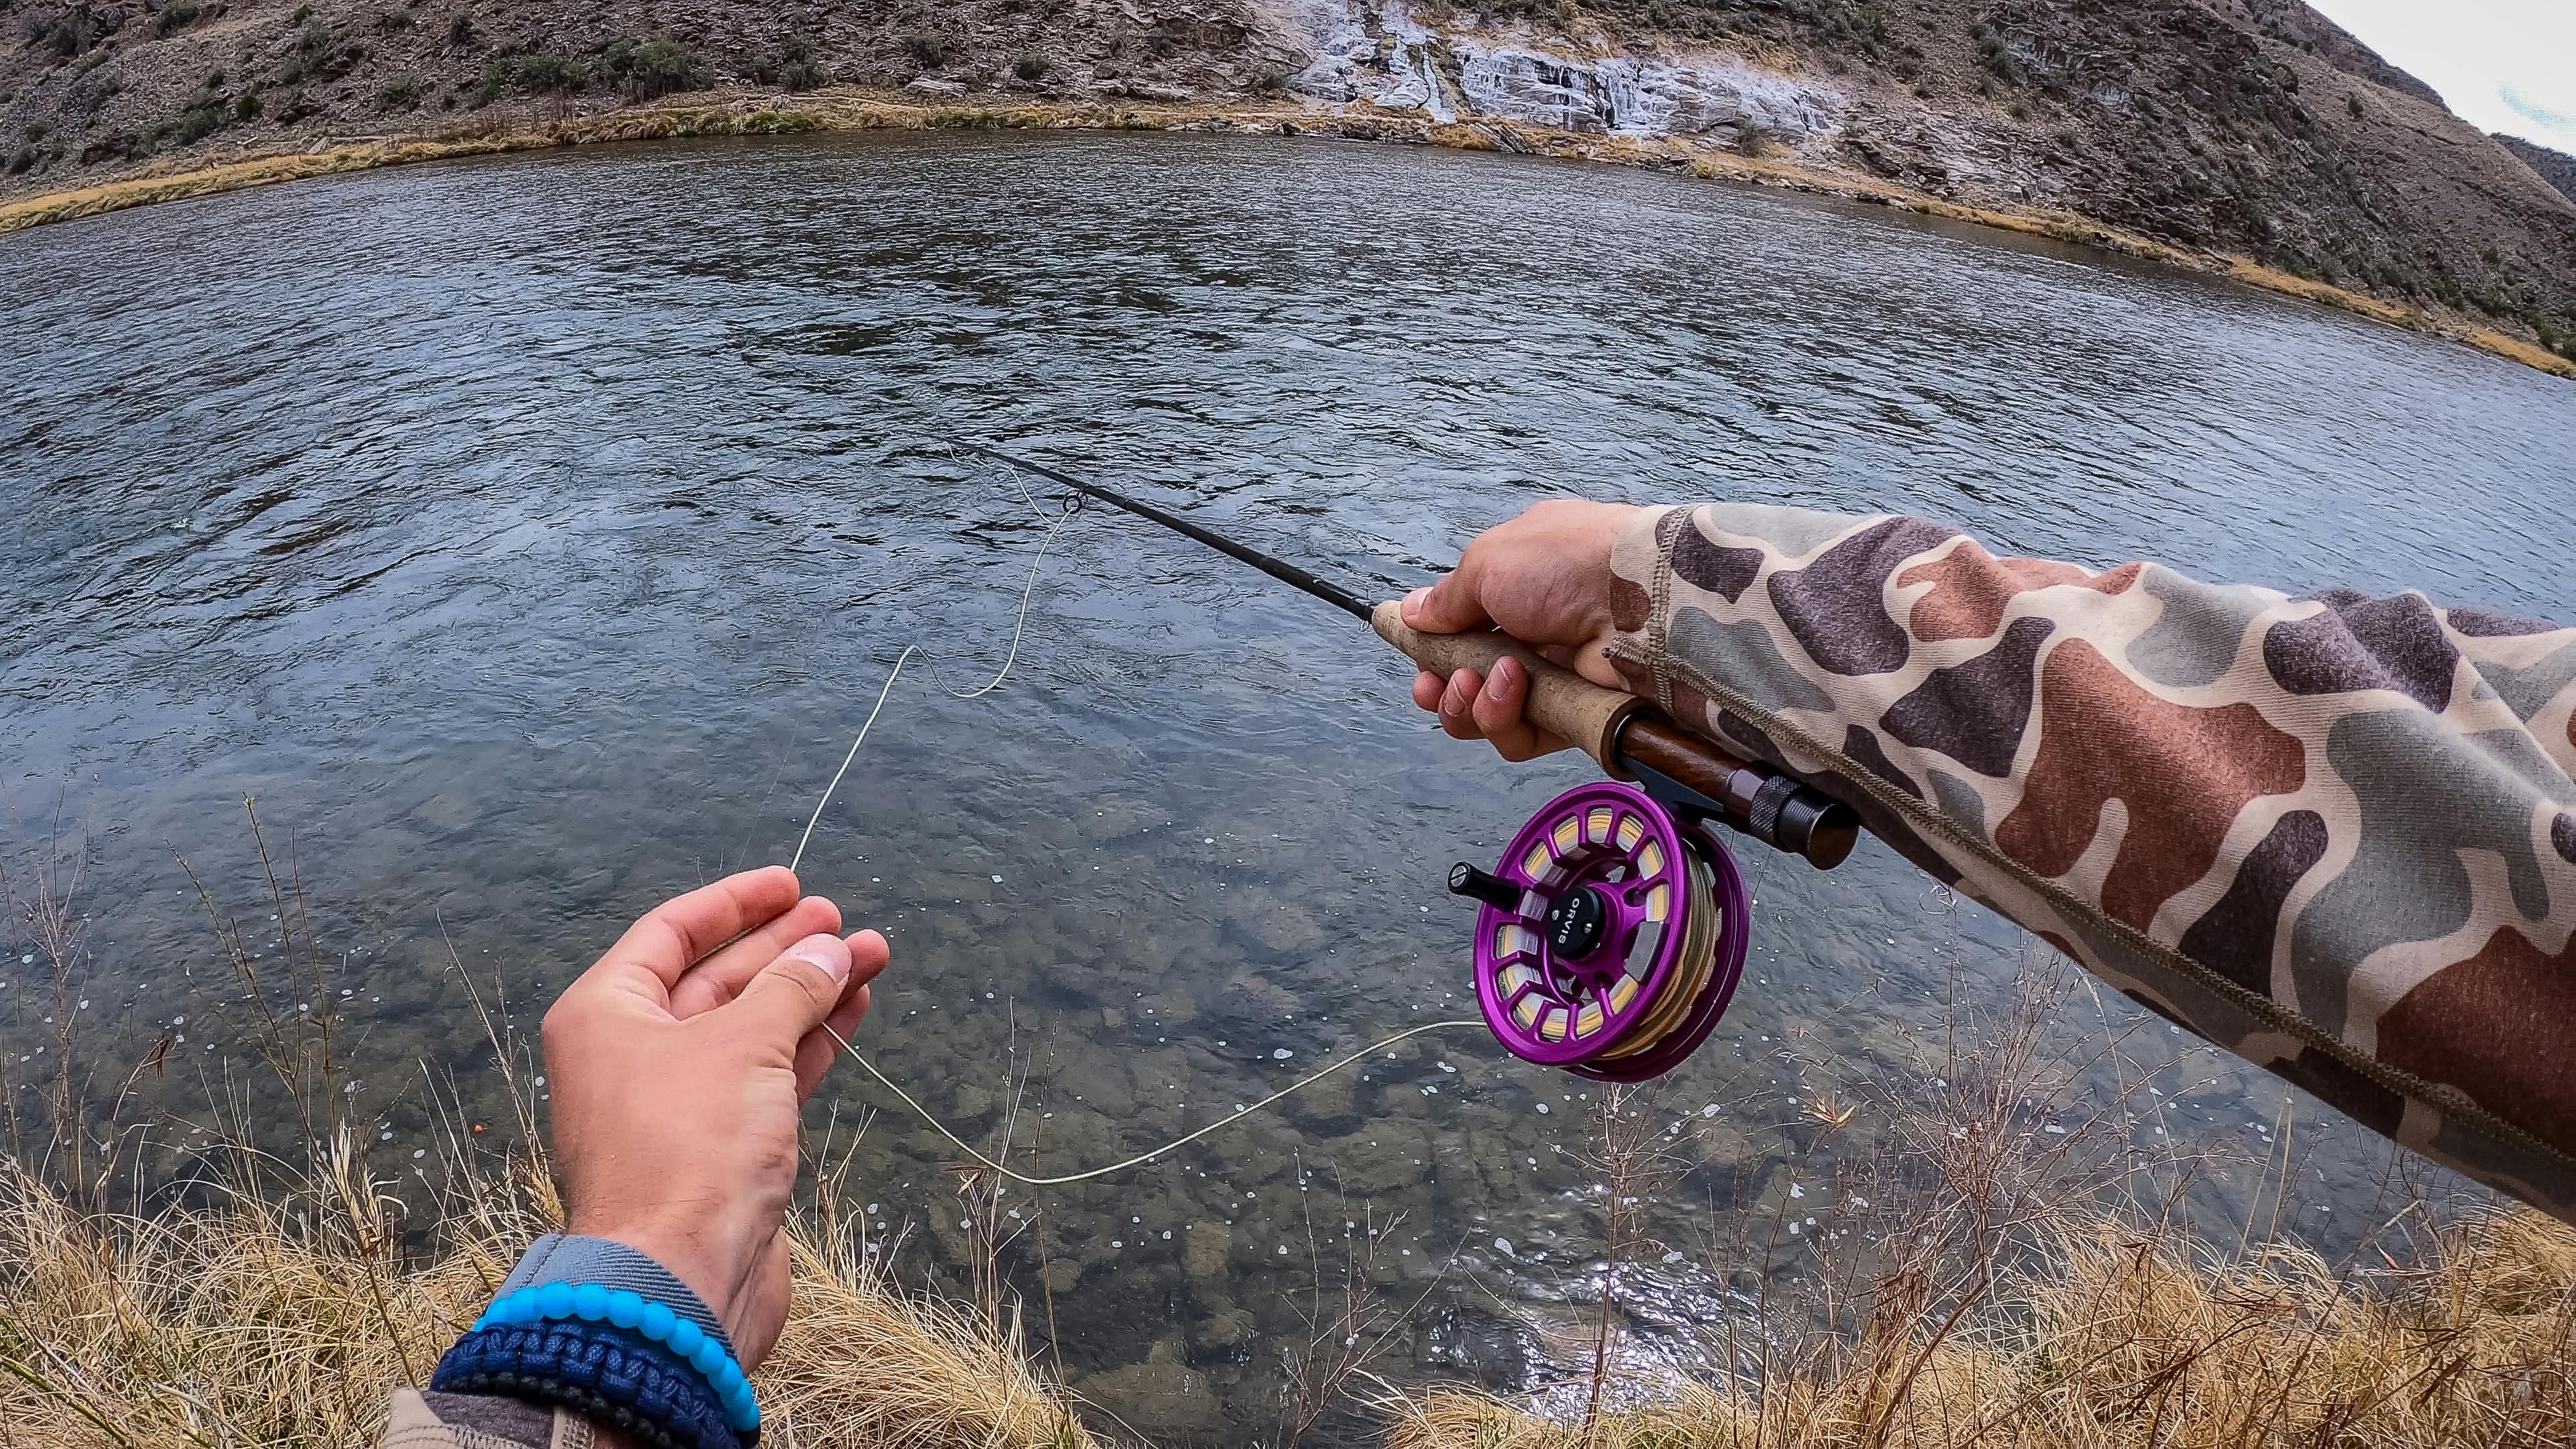 View of someone fishing with the Orvis Recon fly rod. They are using one hand to pull line out and one hand to hold the rod. 